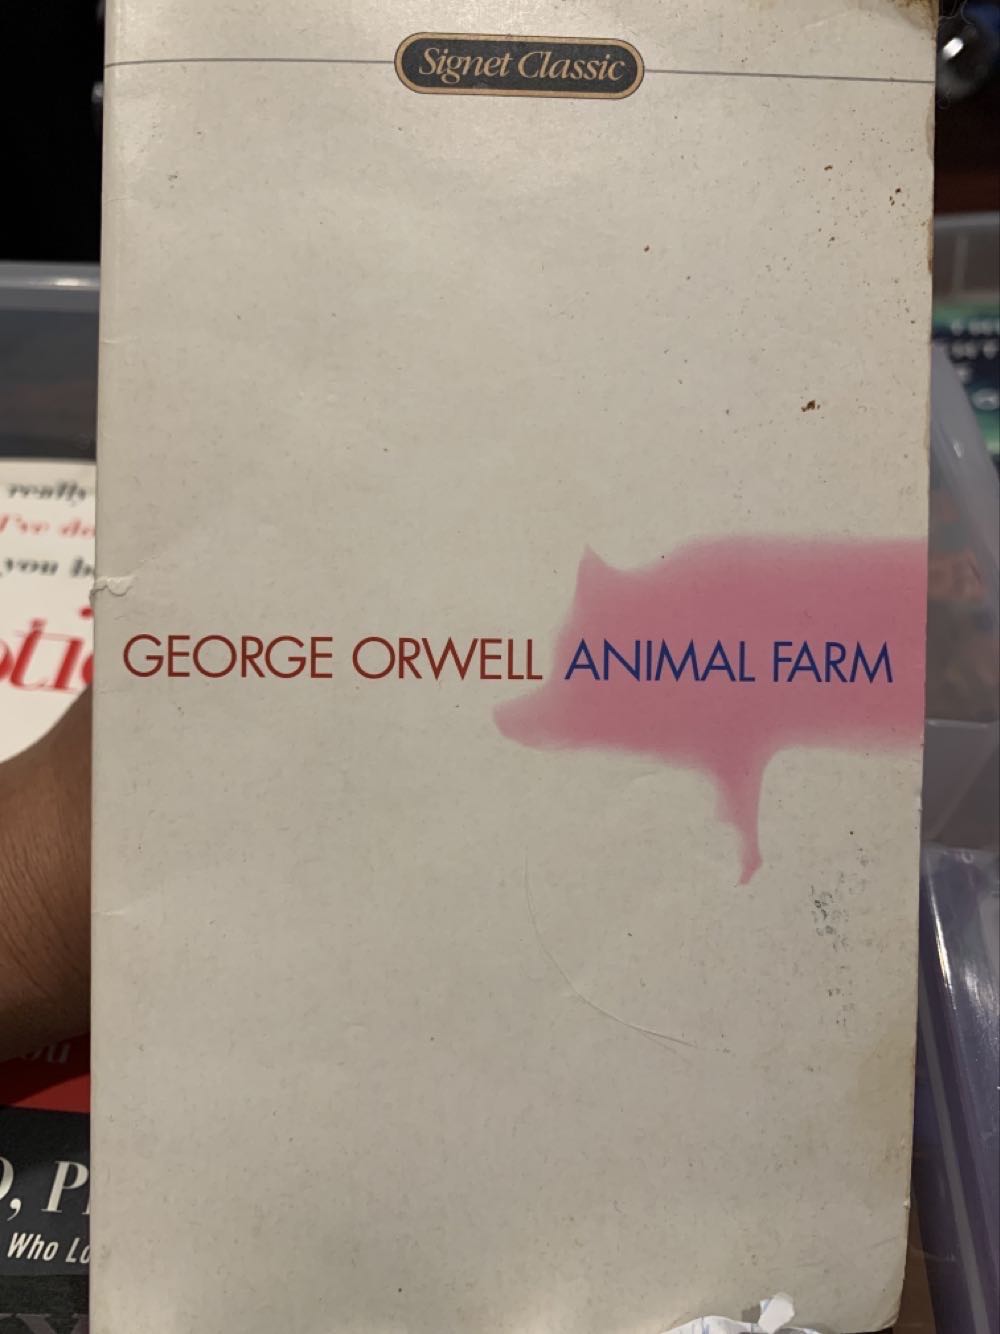 Animal Farm - George Orwell (Signal Classics - Paperback) book collectible [Barcode 9780451526342] - Main Image 4